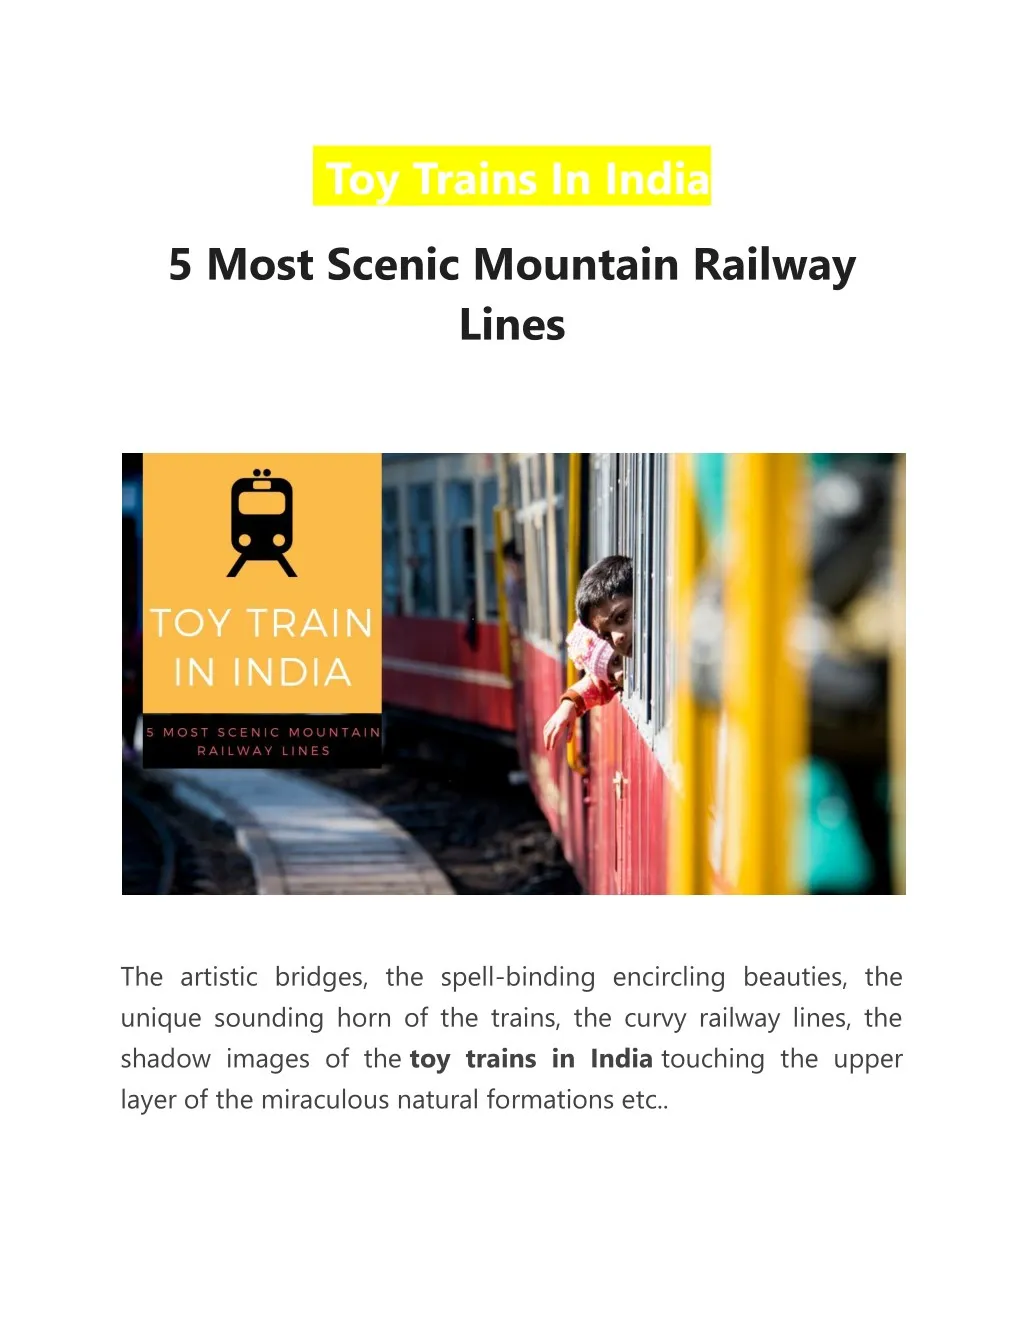 toy trains in india